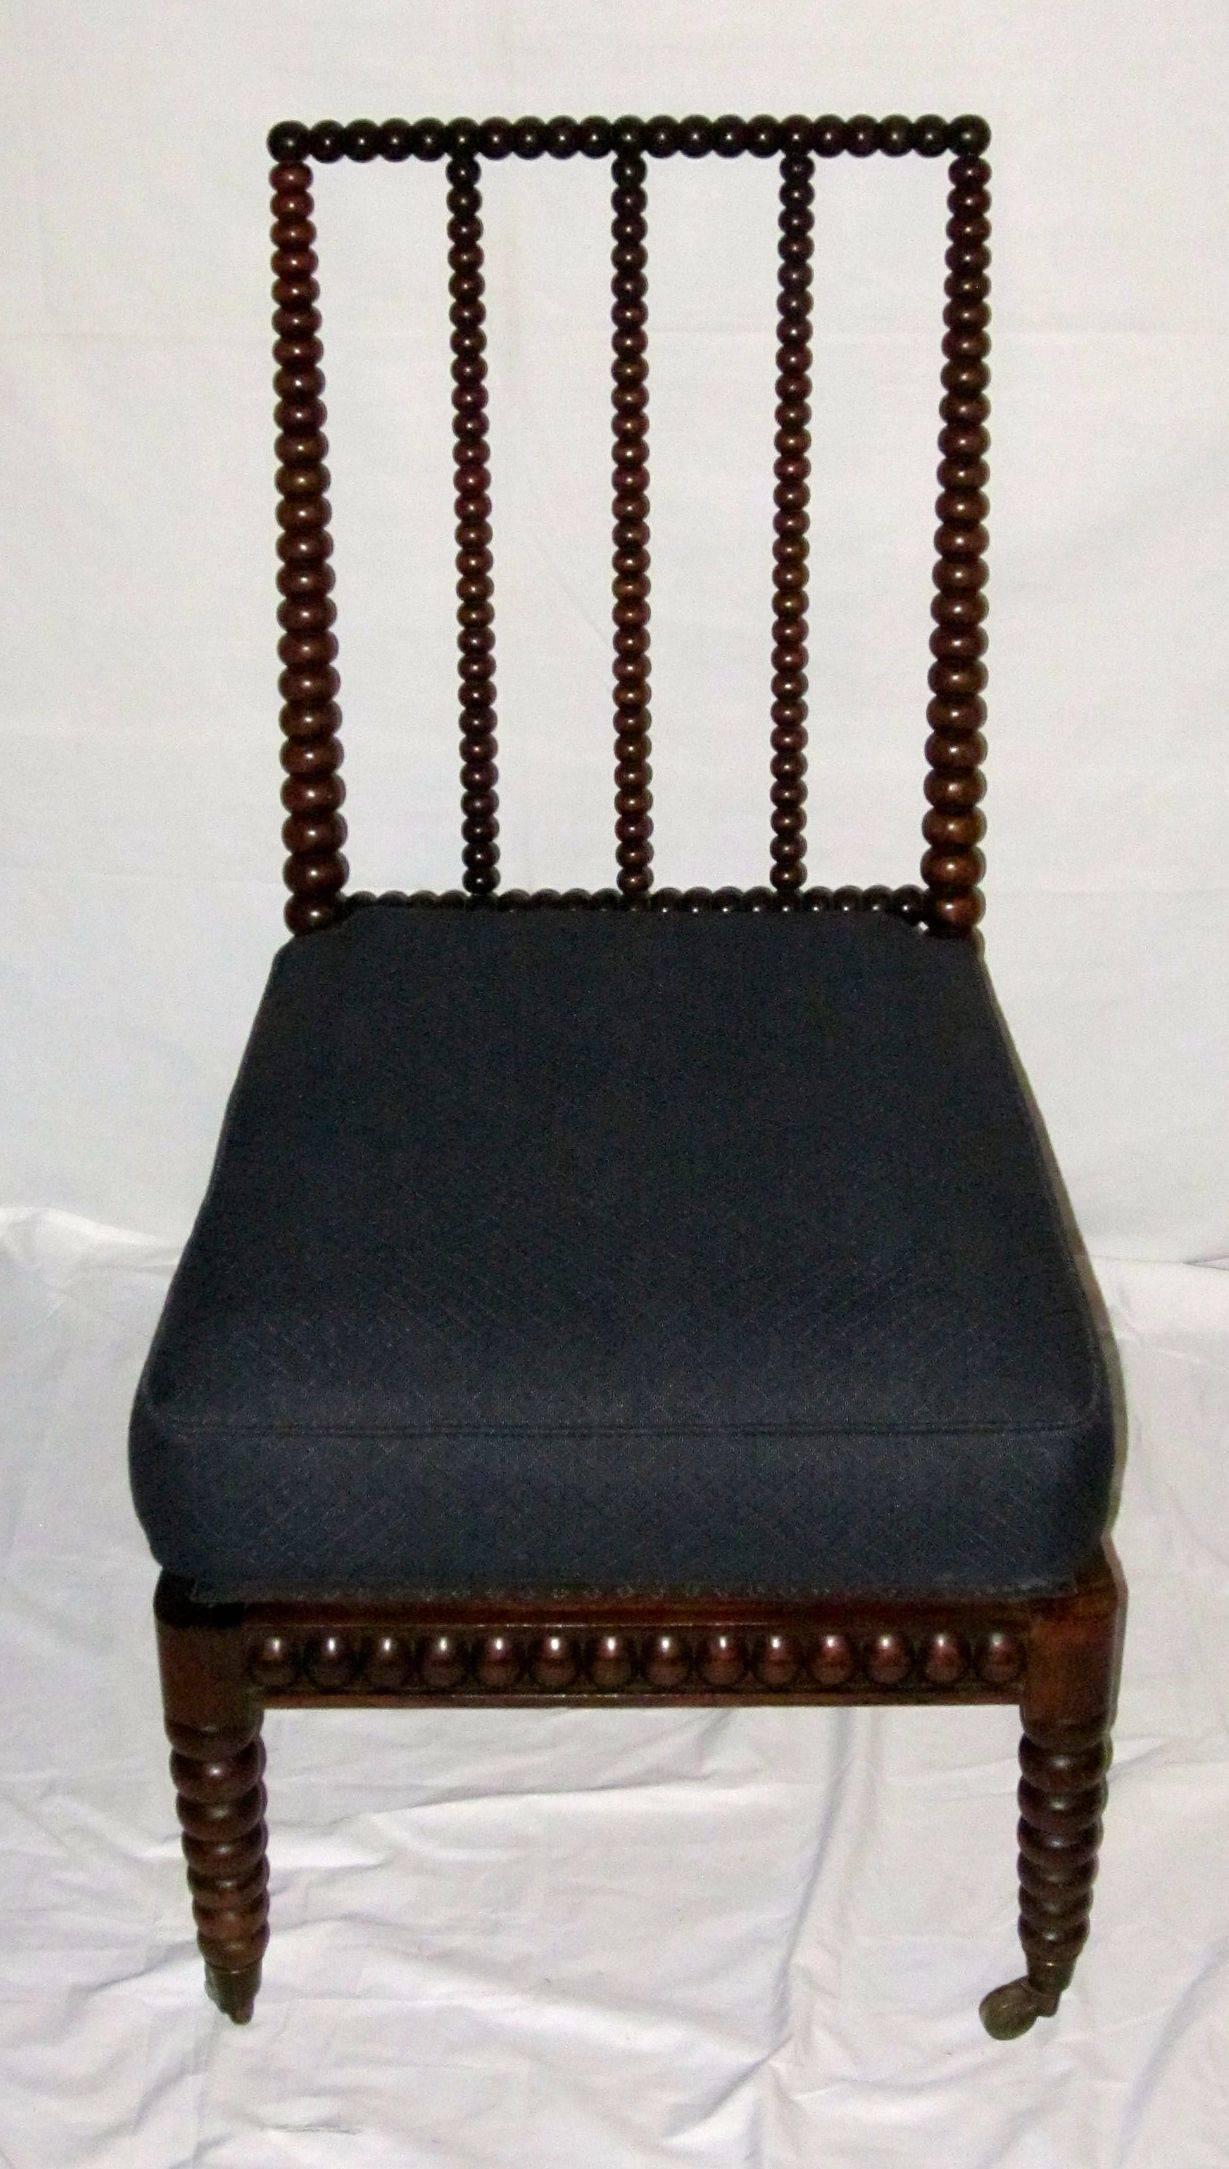 19th century English armless bobbin chair with newly recently reupholstered seat.
Seat is reupholstered in black jacquard horsehair fabric.
Excellent condition.